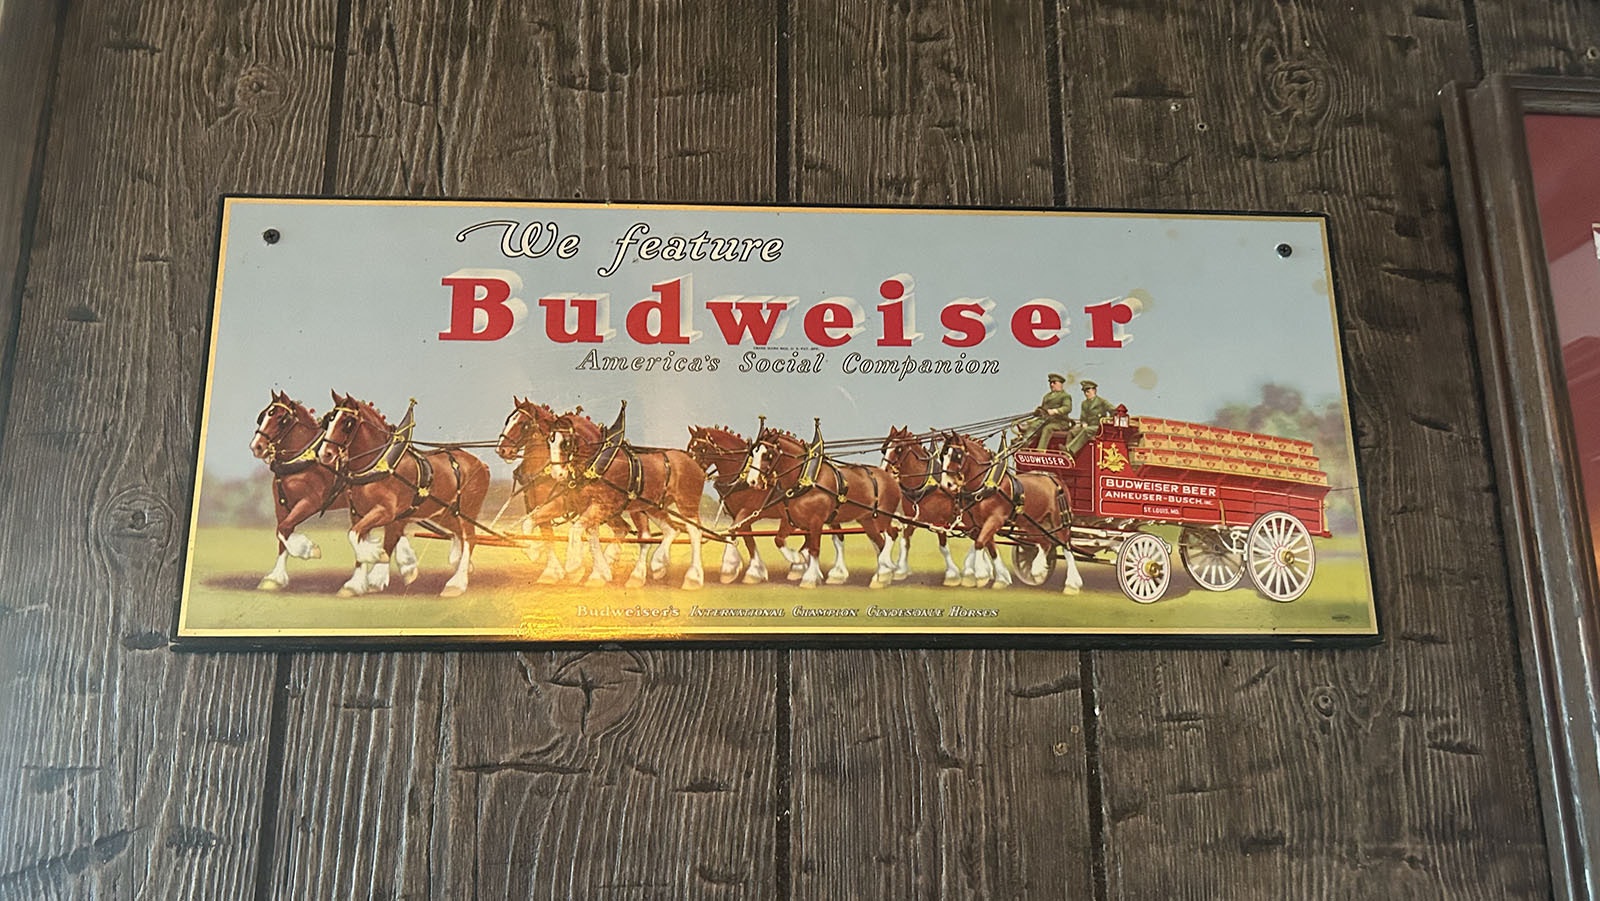 An enamel-coated Budweiser sign on display at the GRB.